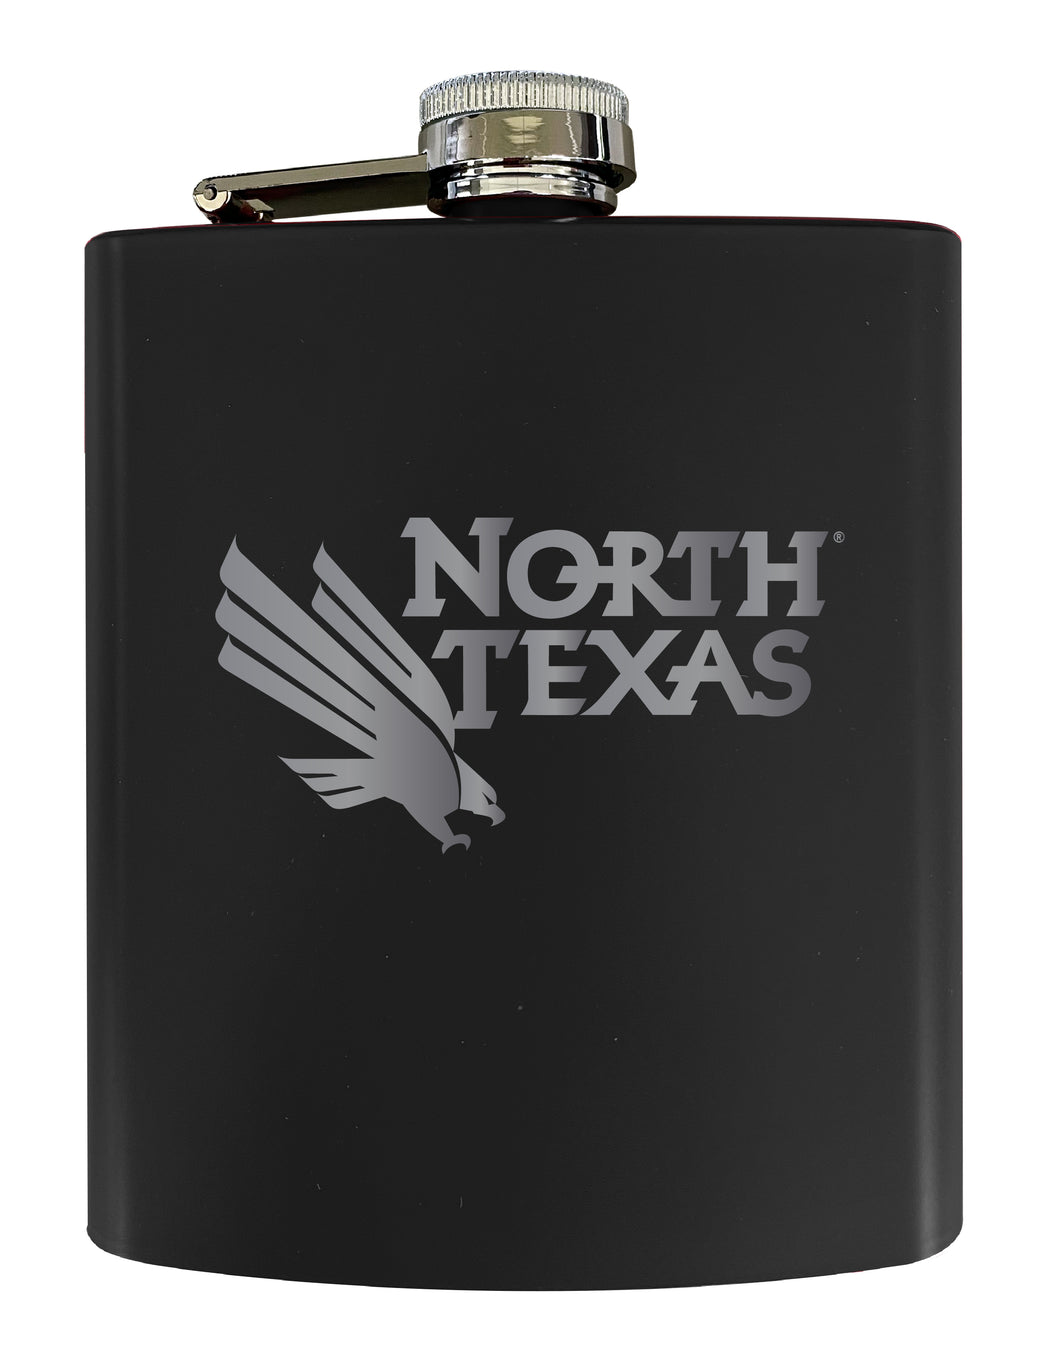 North Texas Stainless Steel Etched Flask 7 oz - Officially Licensed, Choose Your Color, Matte Finish